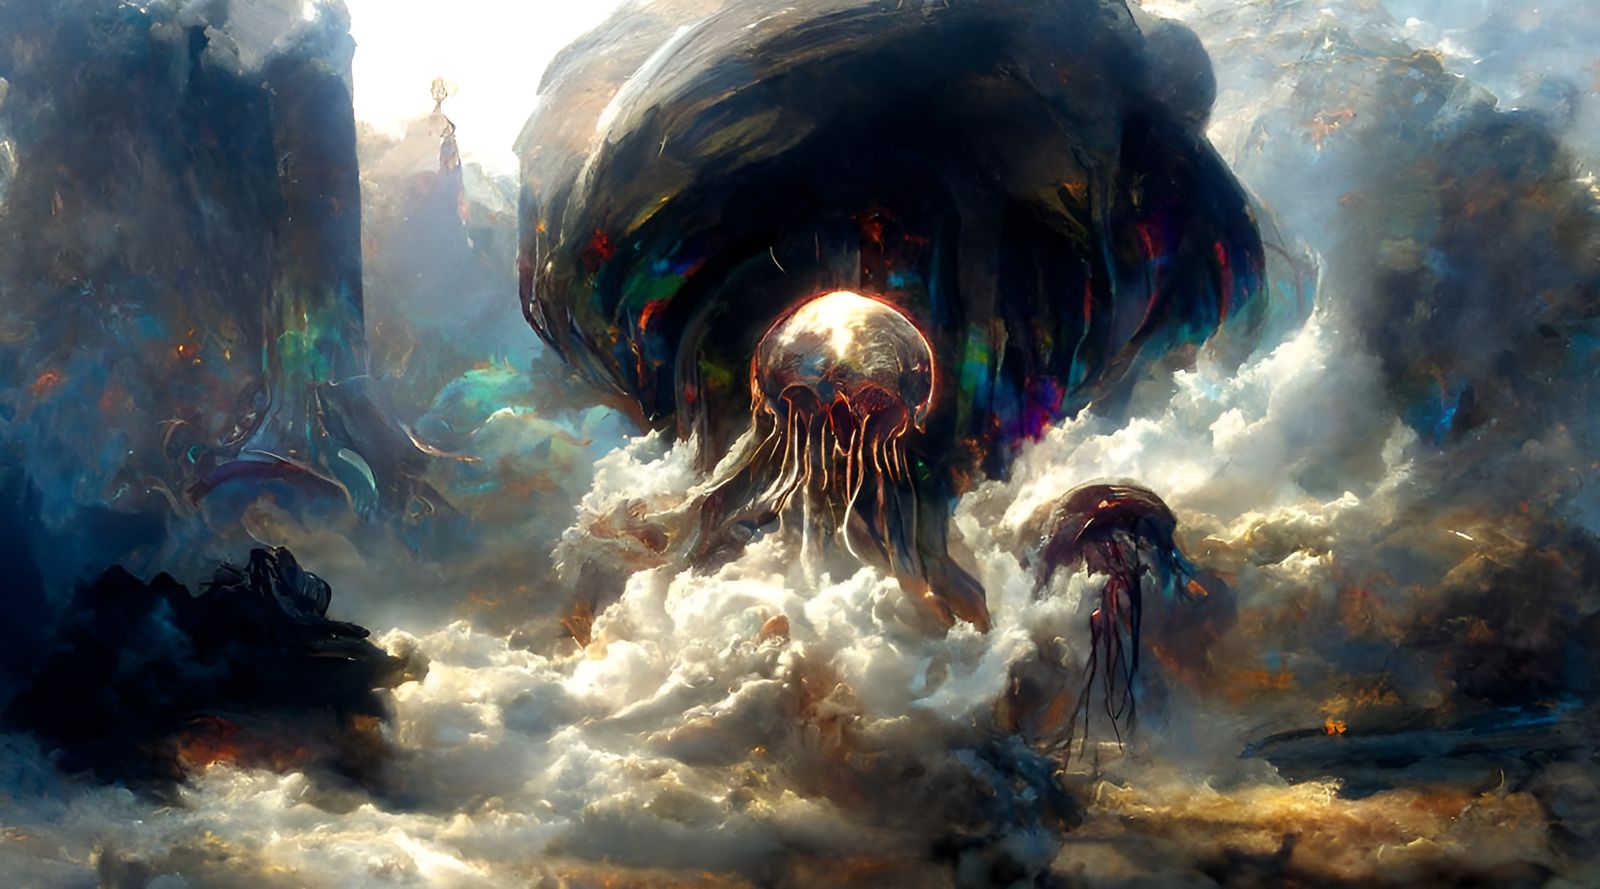 Gigantic Lovecraftian Jellyfish of the eldritch gods, rising from the ...